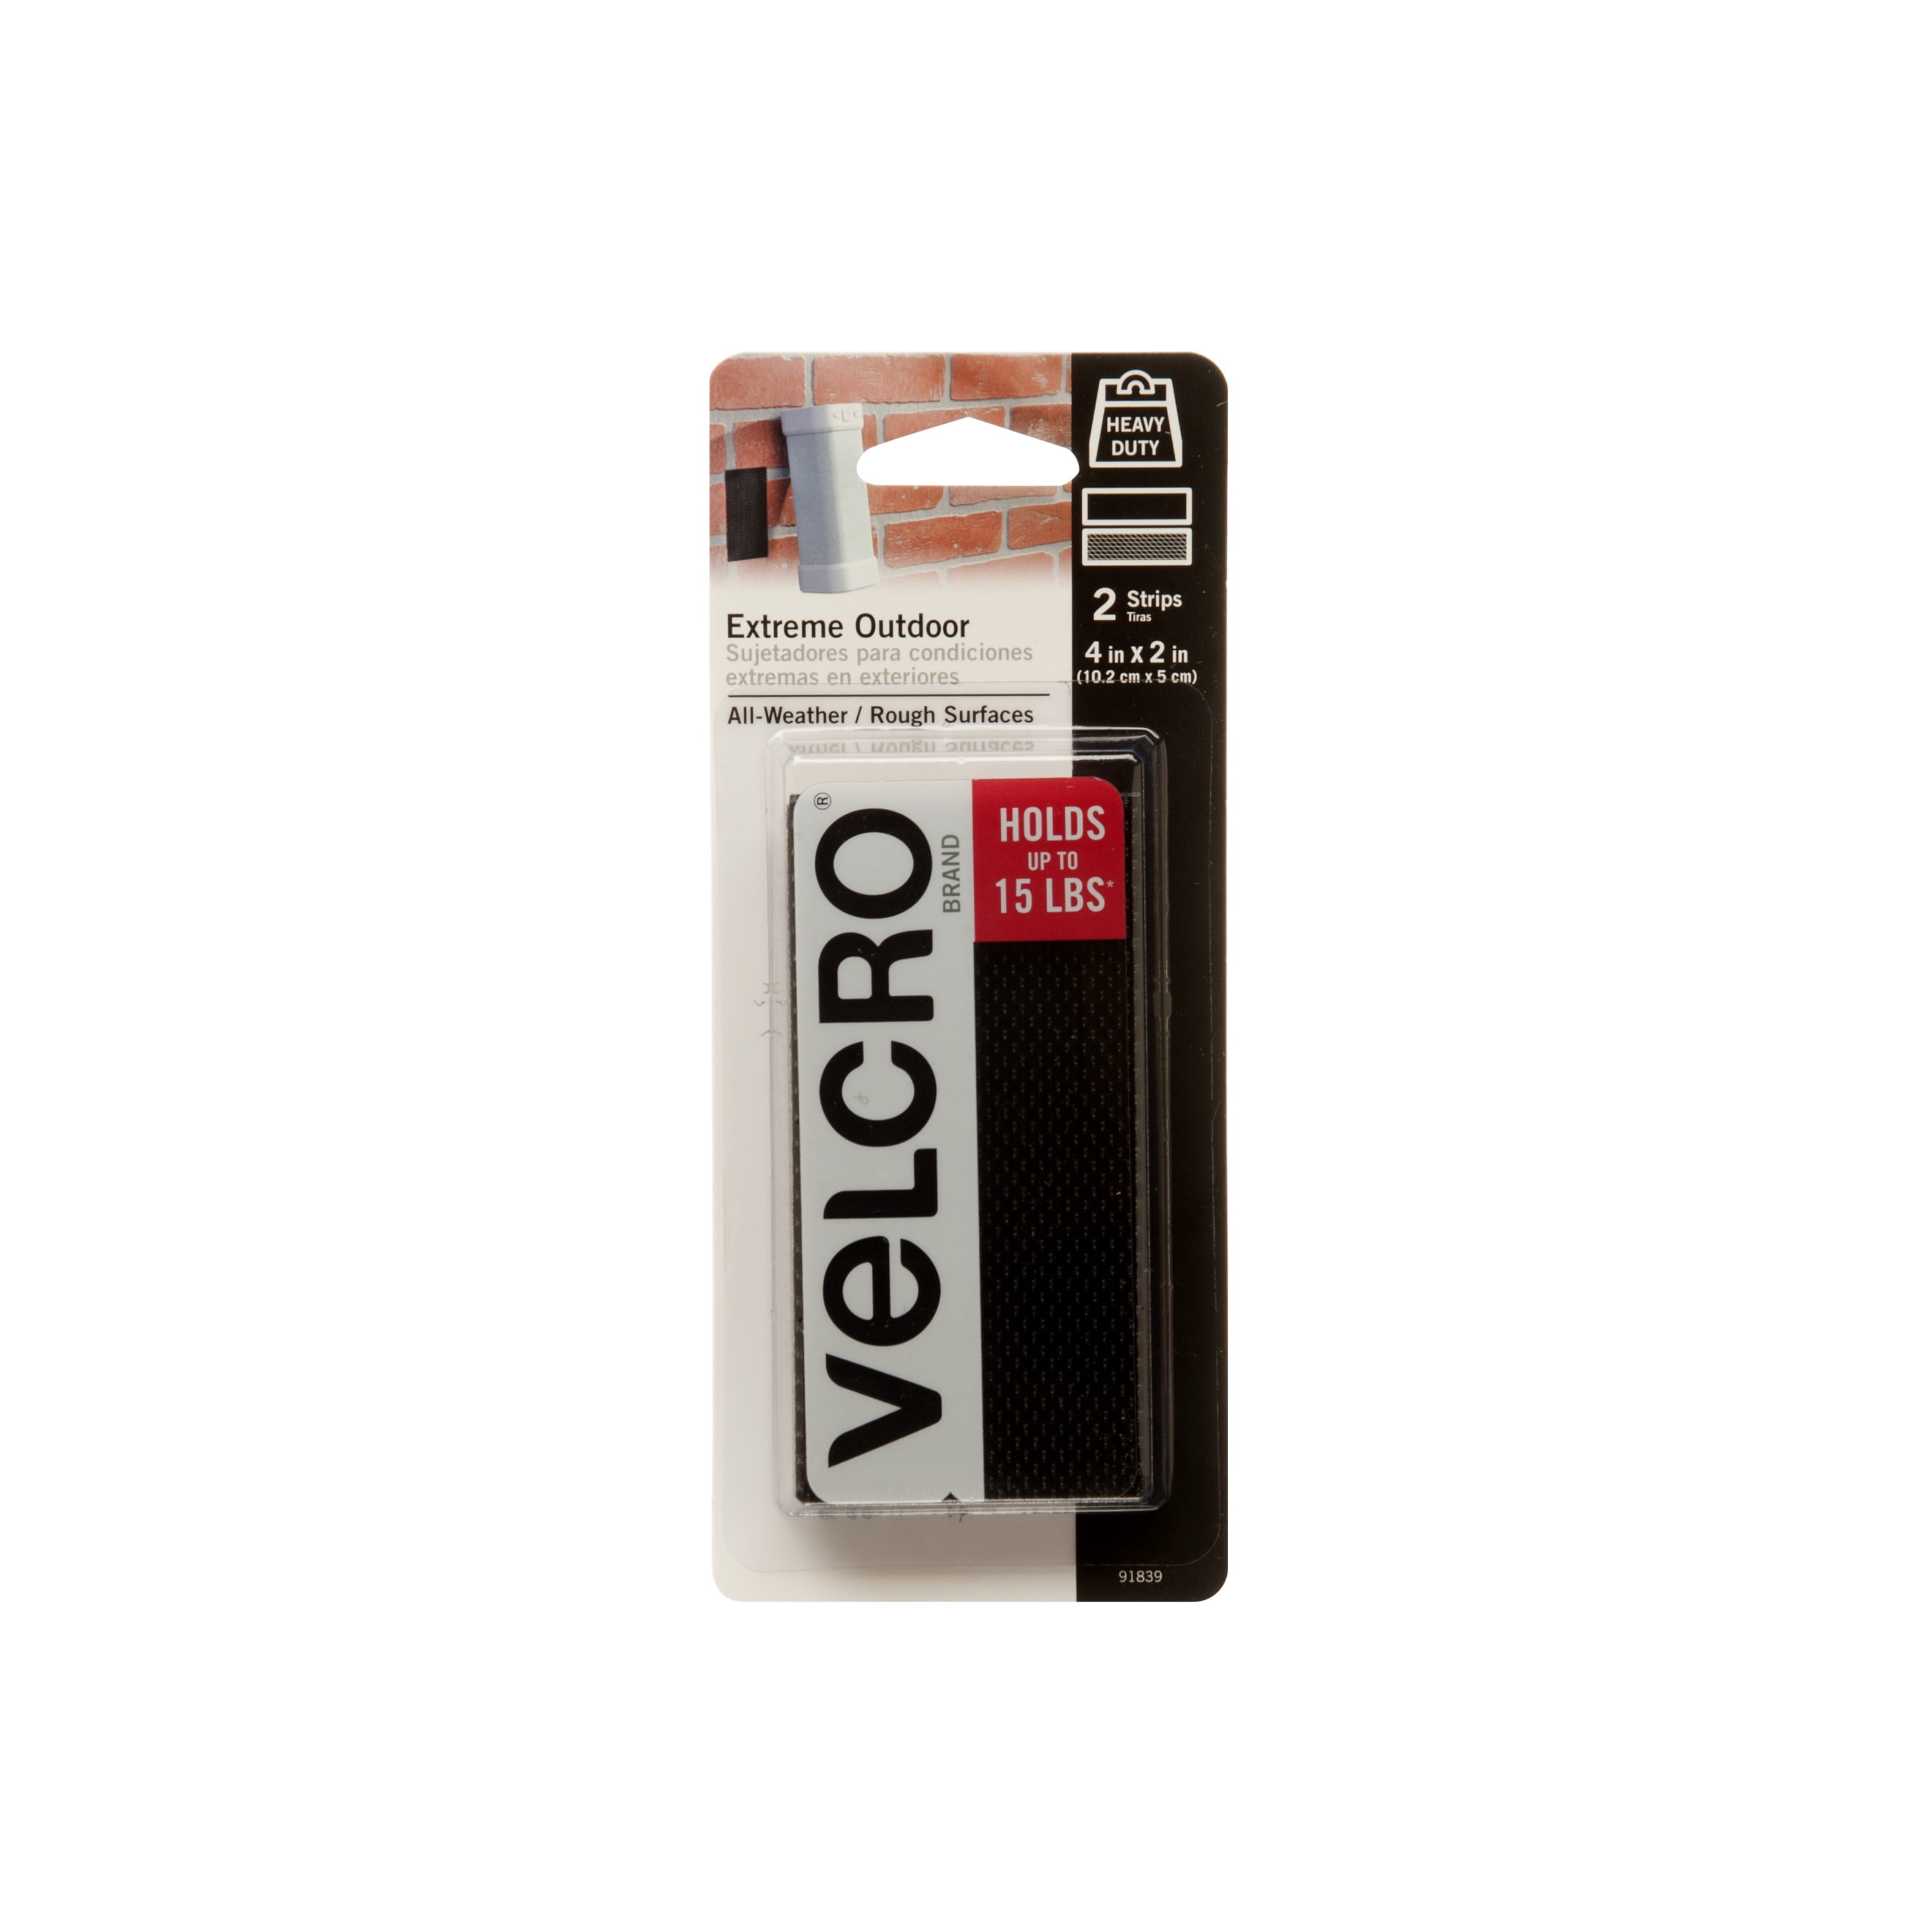 VELCRO BRAND Extreme Outdoor 10ft X 1in Roll Titanium for sale online 